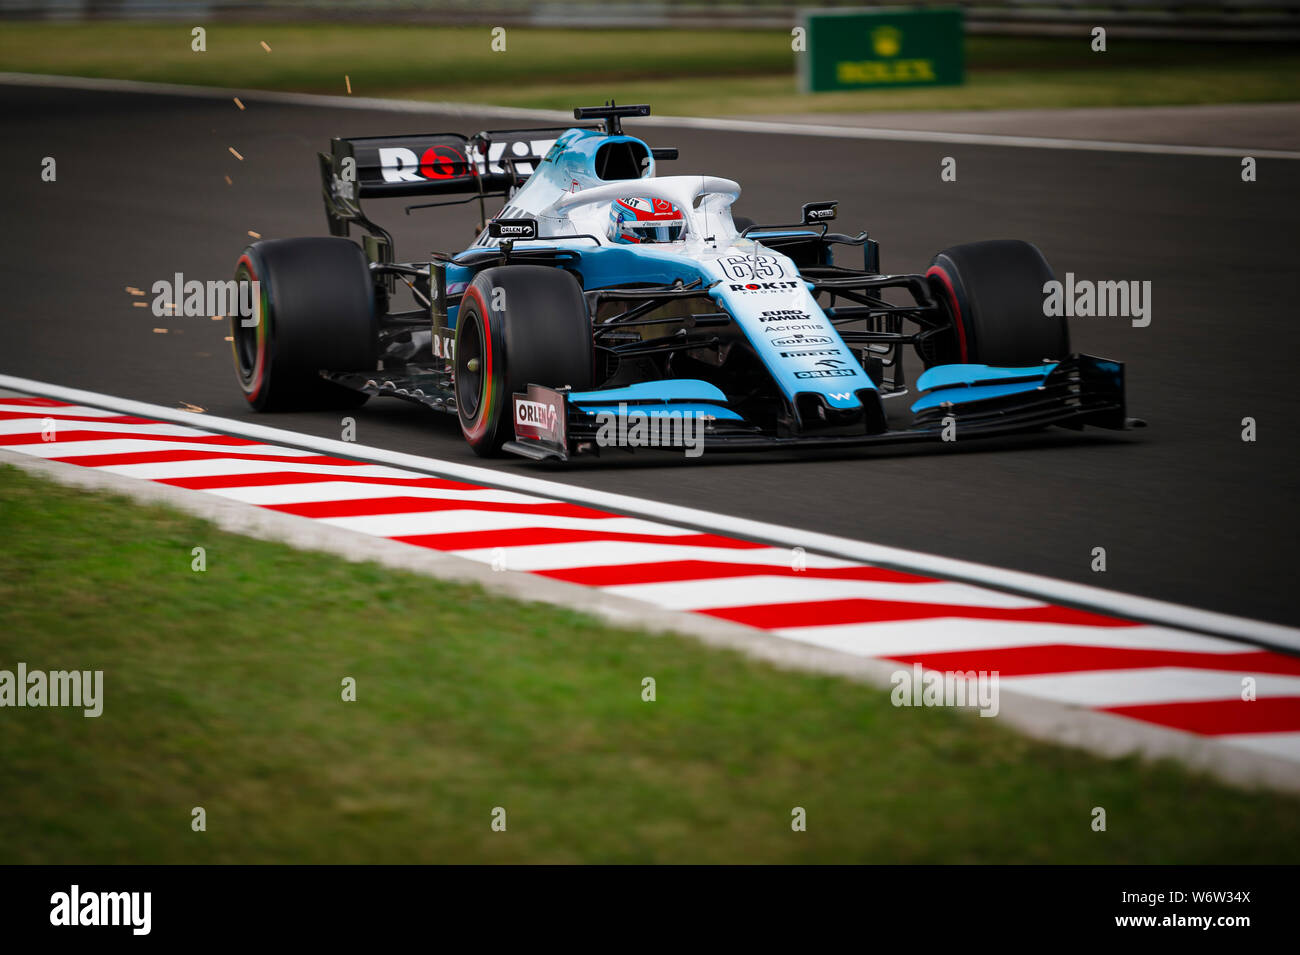 ROKiT Williams Racing’s British driver George Russell competes during the first practice session of the Hungarian F1 Grand Prix. Stock Photo